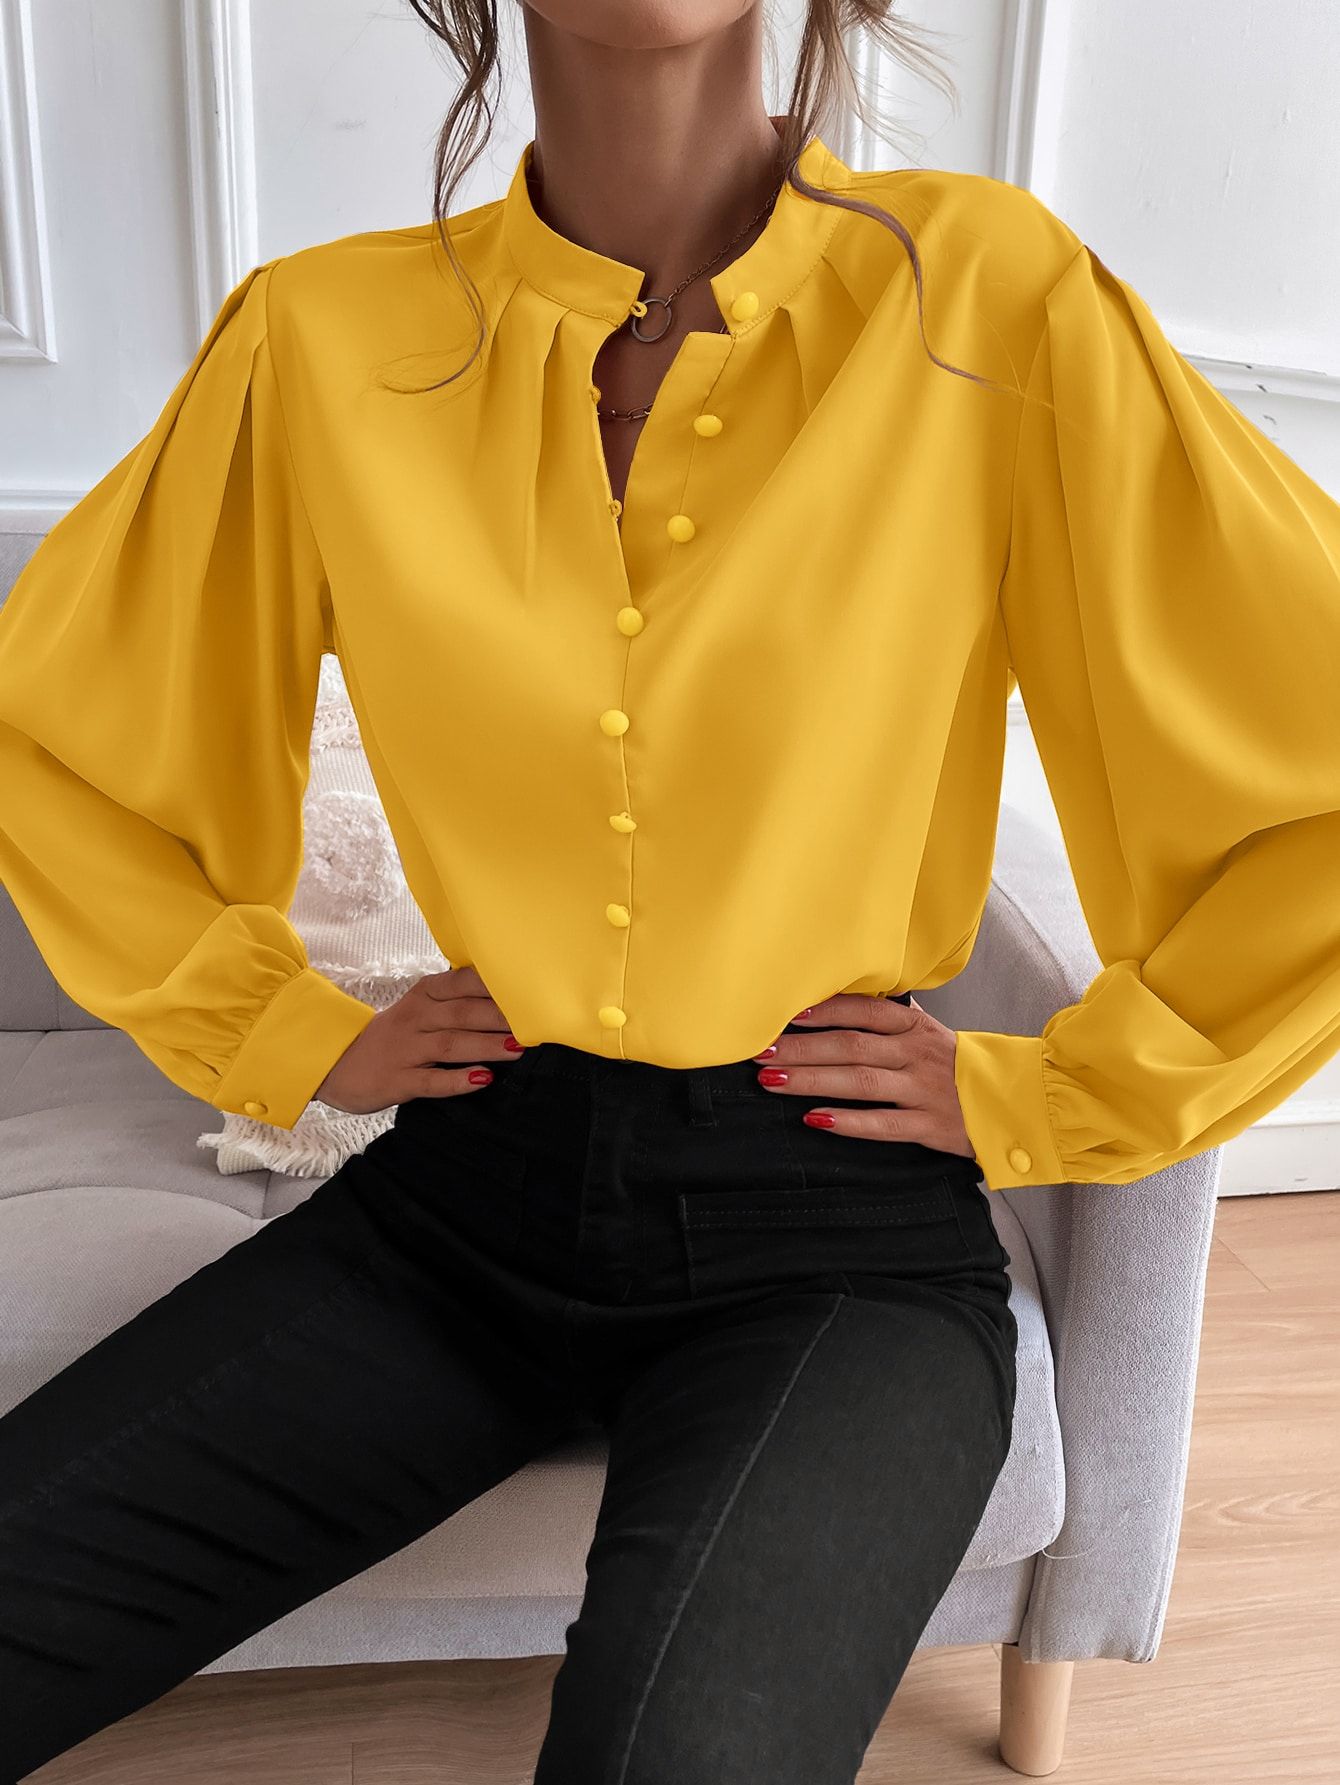 How to Style Yellow Blouse: Best 15 Cheerful & Chic Outfit Ideas for Women